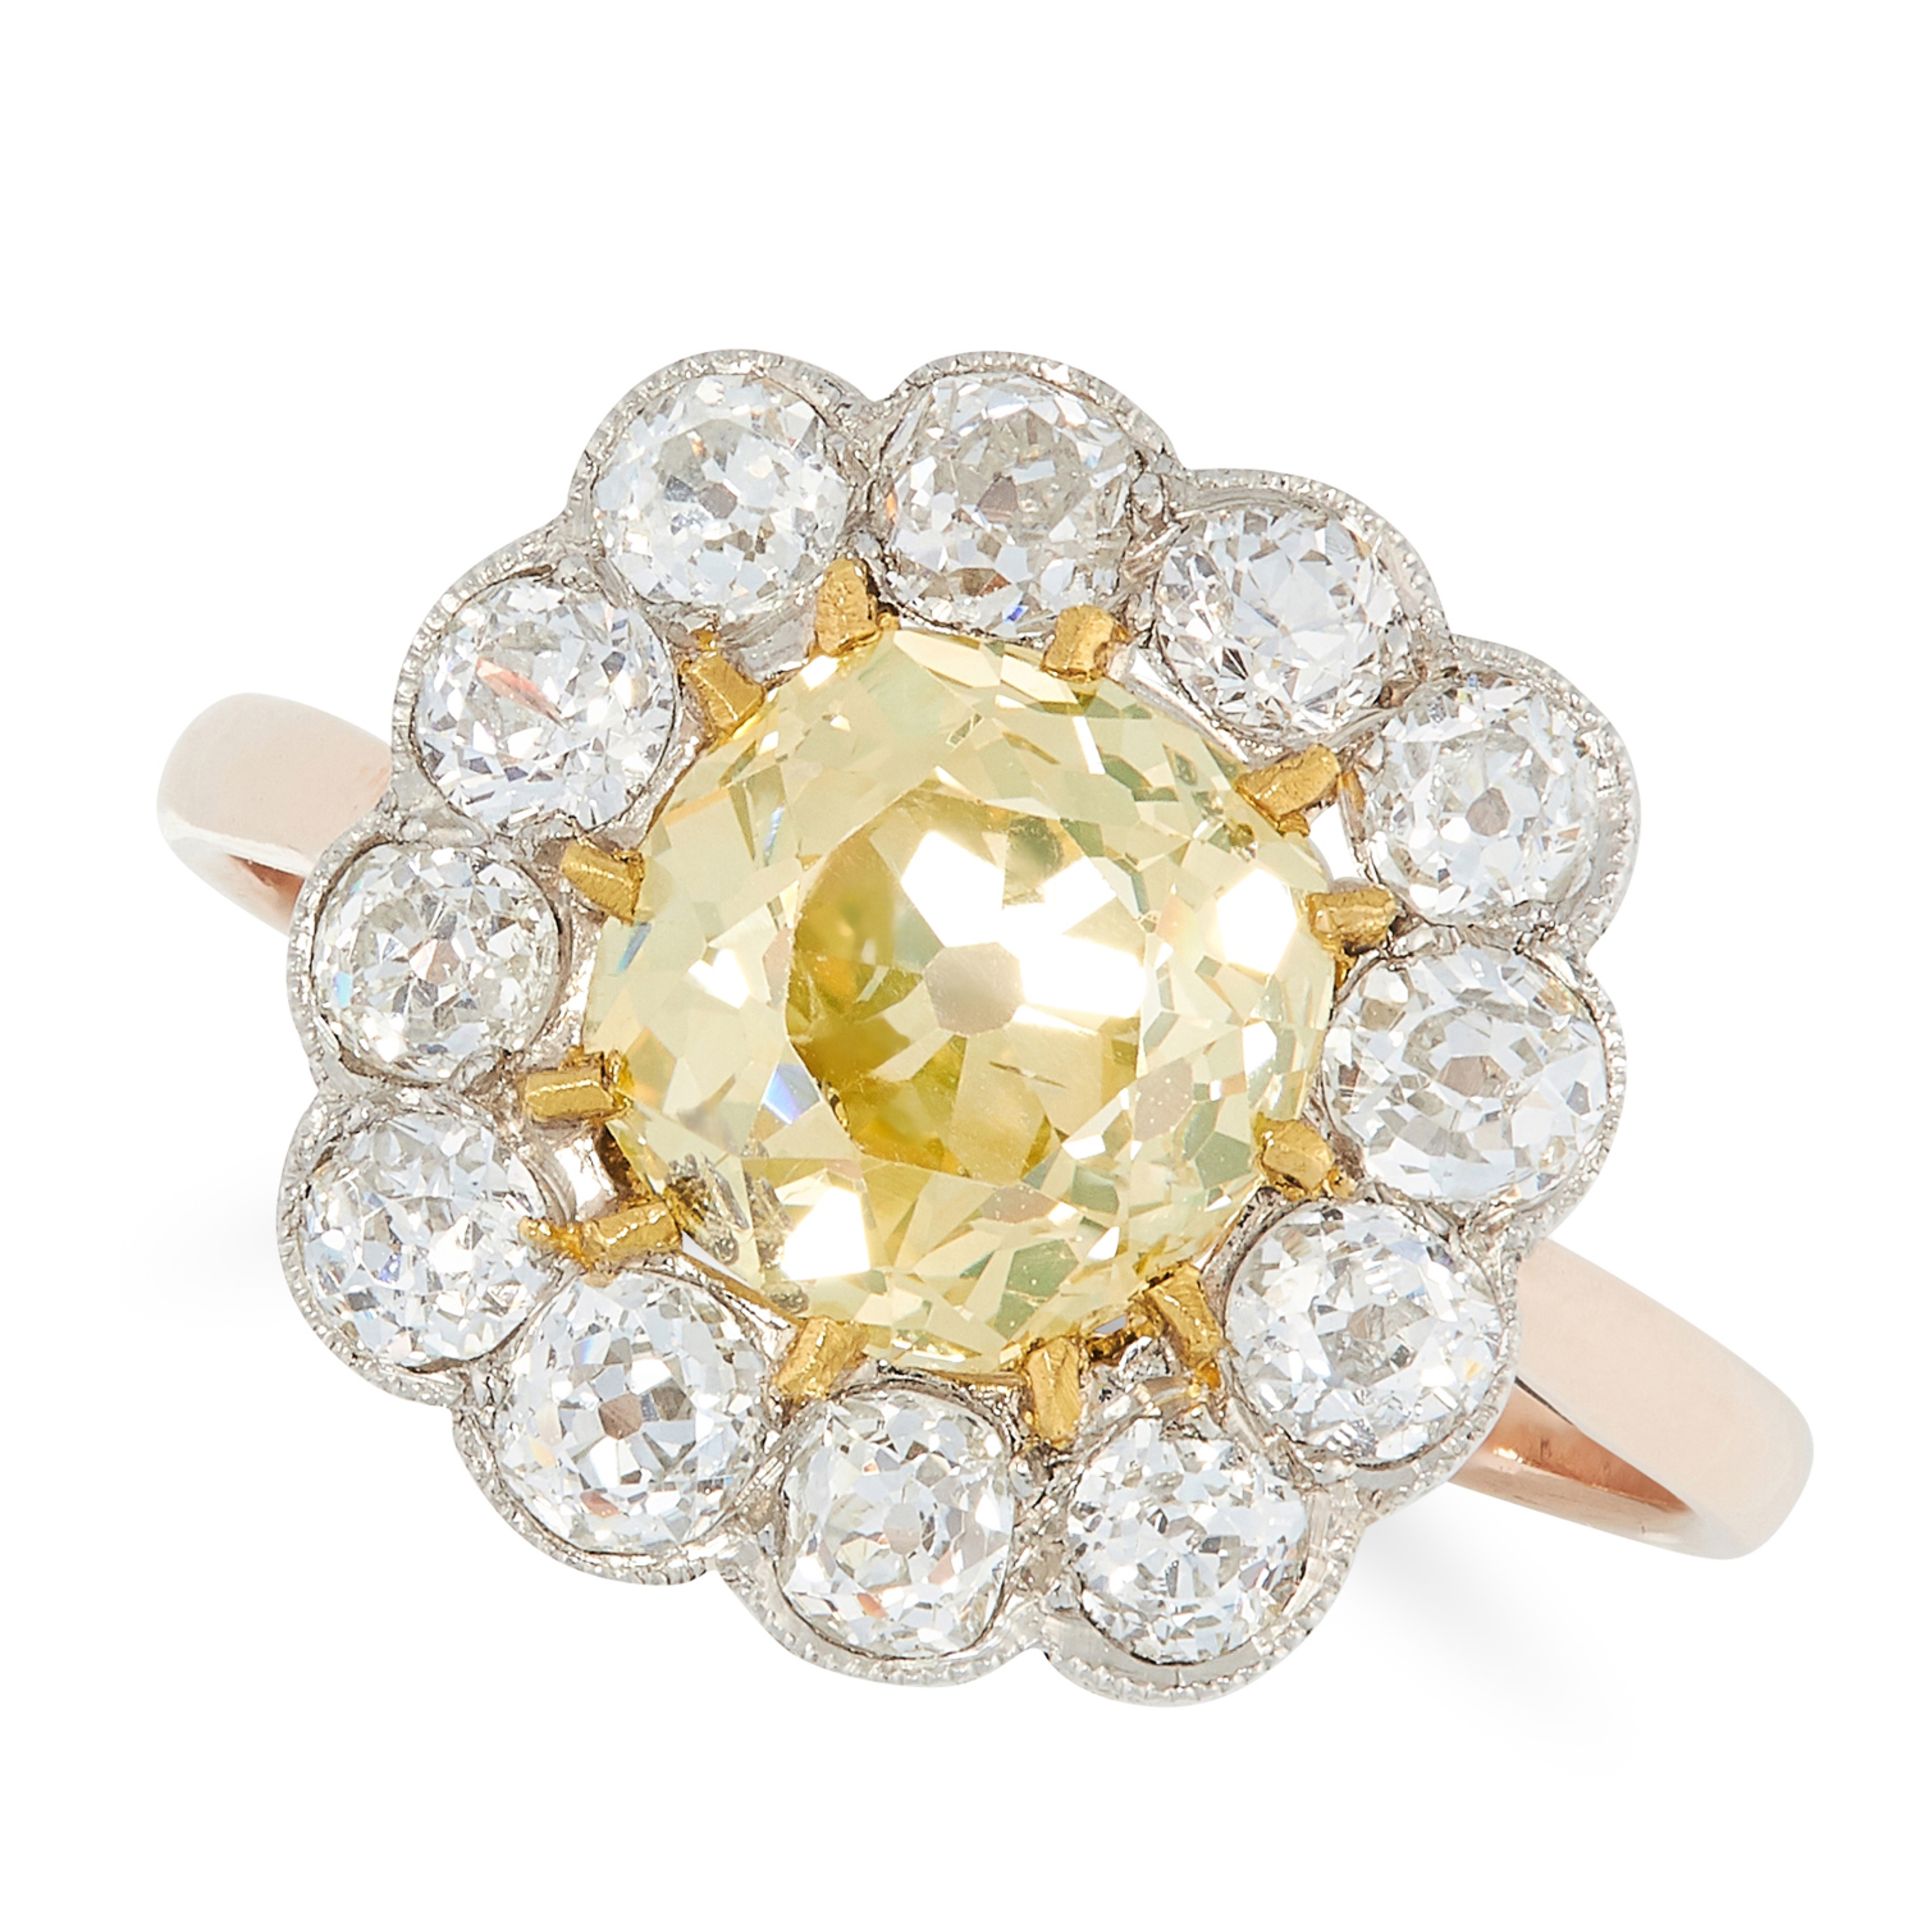 A FANCY YELLOW DIAMOND CLUSTER RING in yellow gold, set with an old cut fancy yellow diamond of